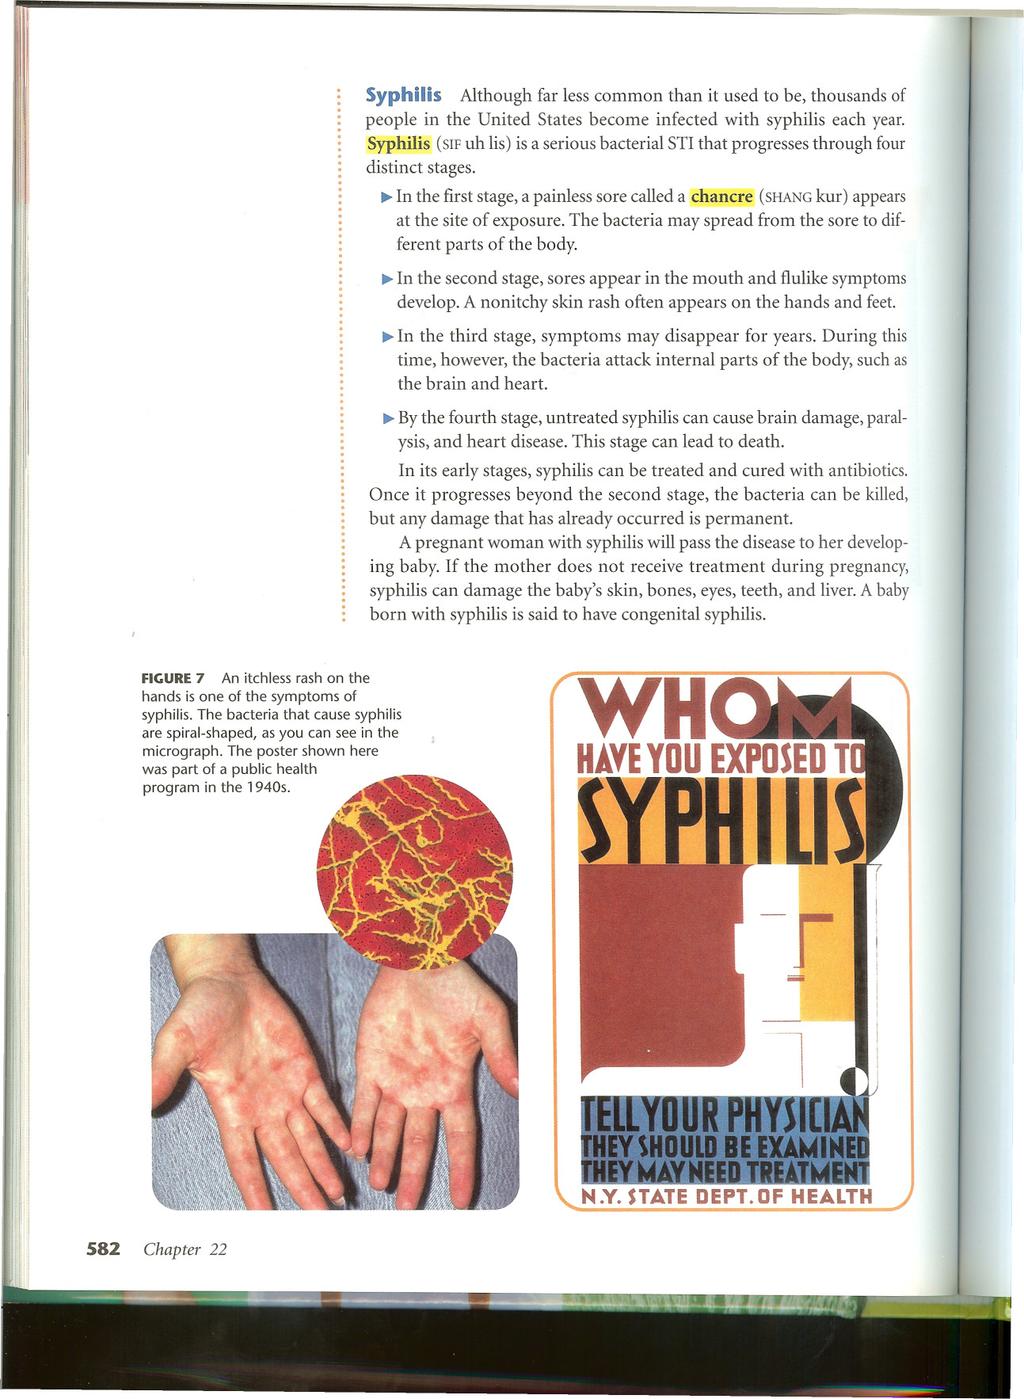 Syphilis Although far less common than it used to be, thousands of people in the United States become infected with syphilis each year.